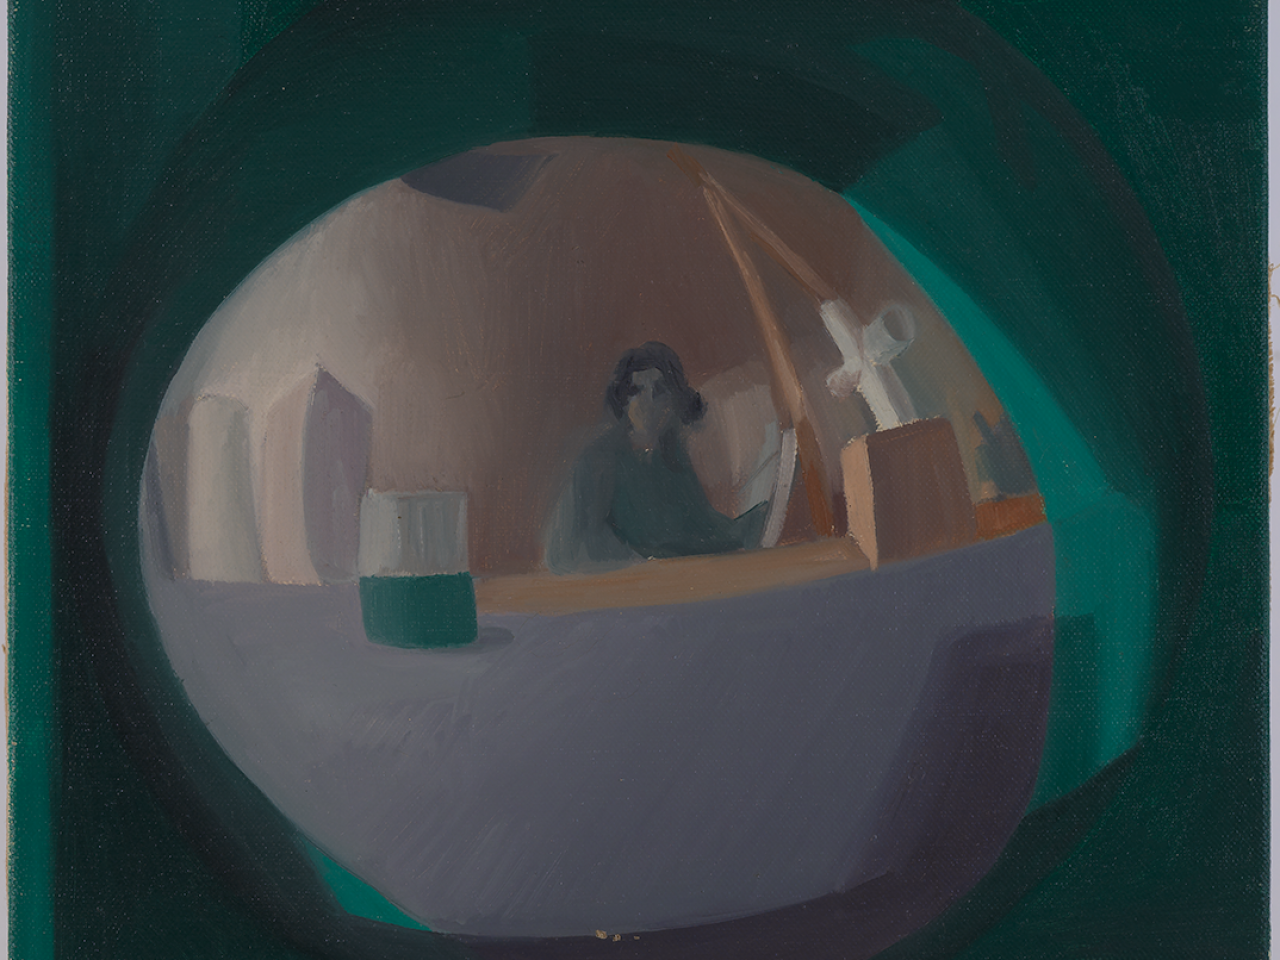 Self-portrait of Samia Halaby in a sphere